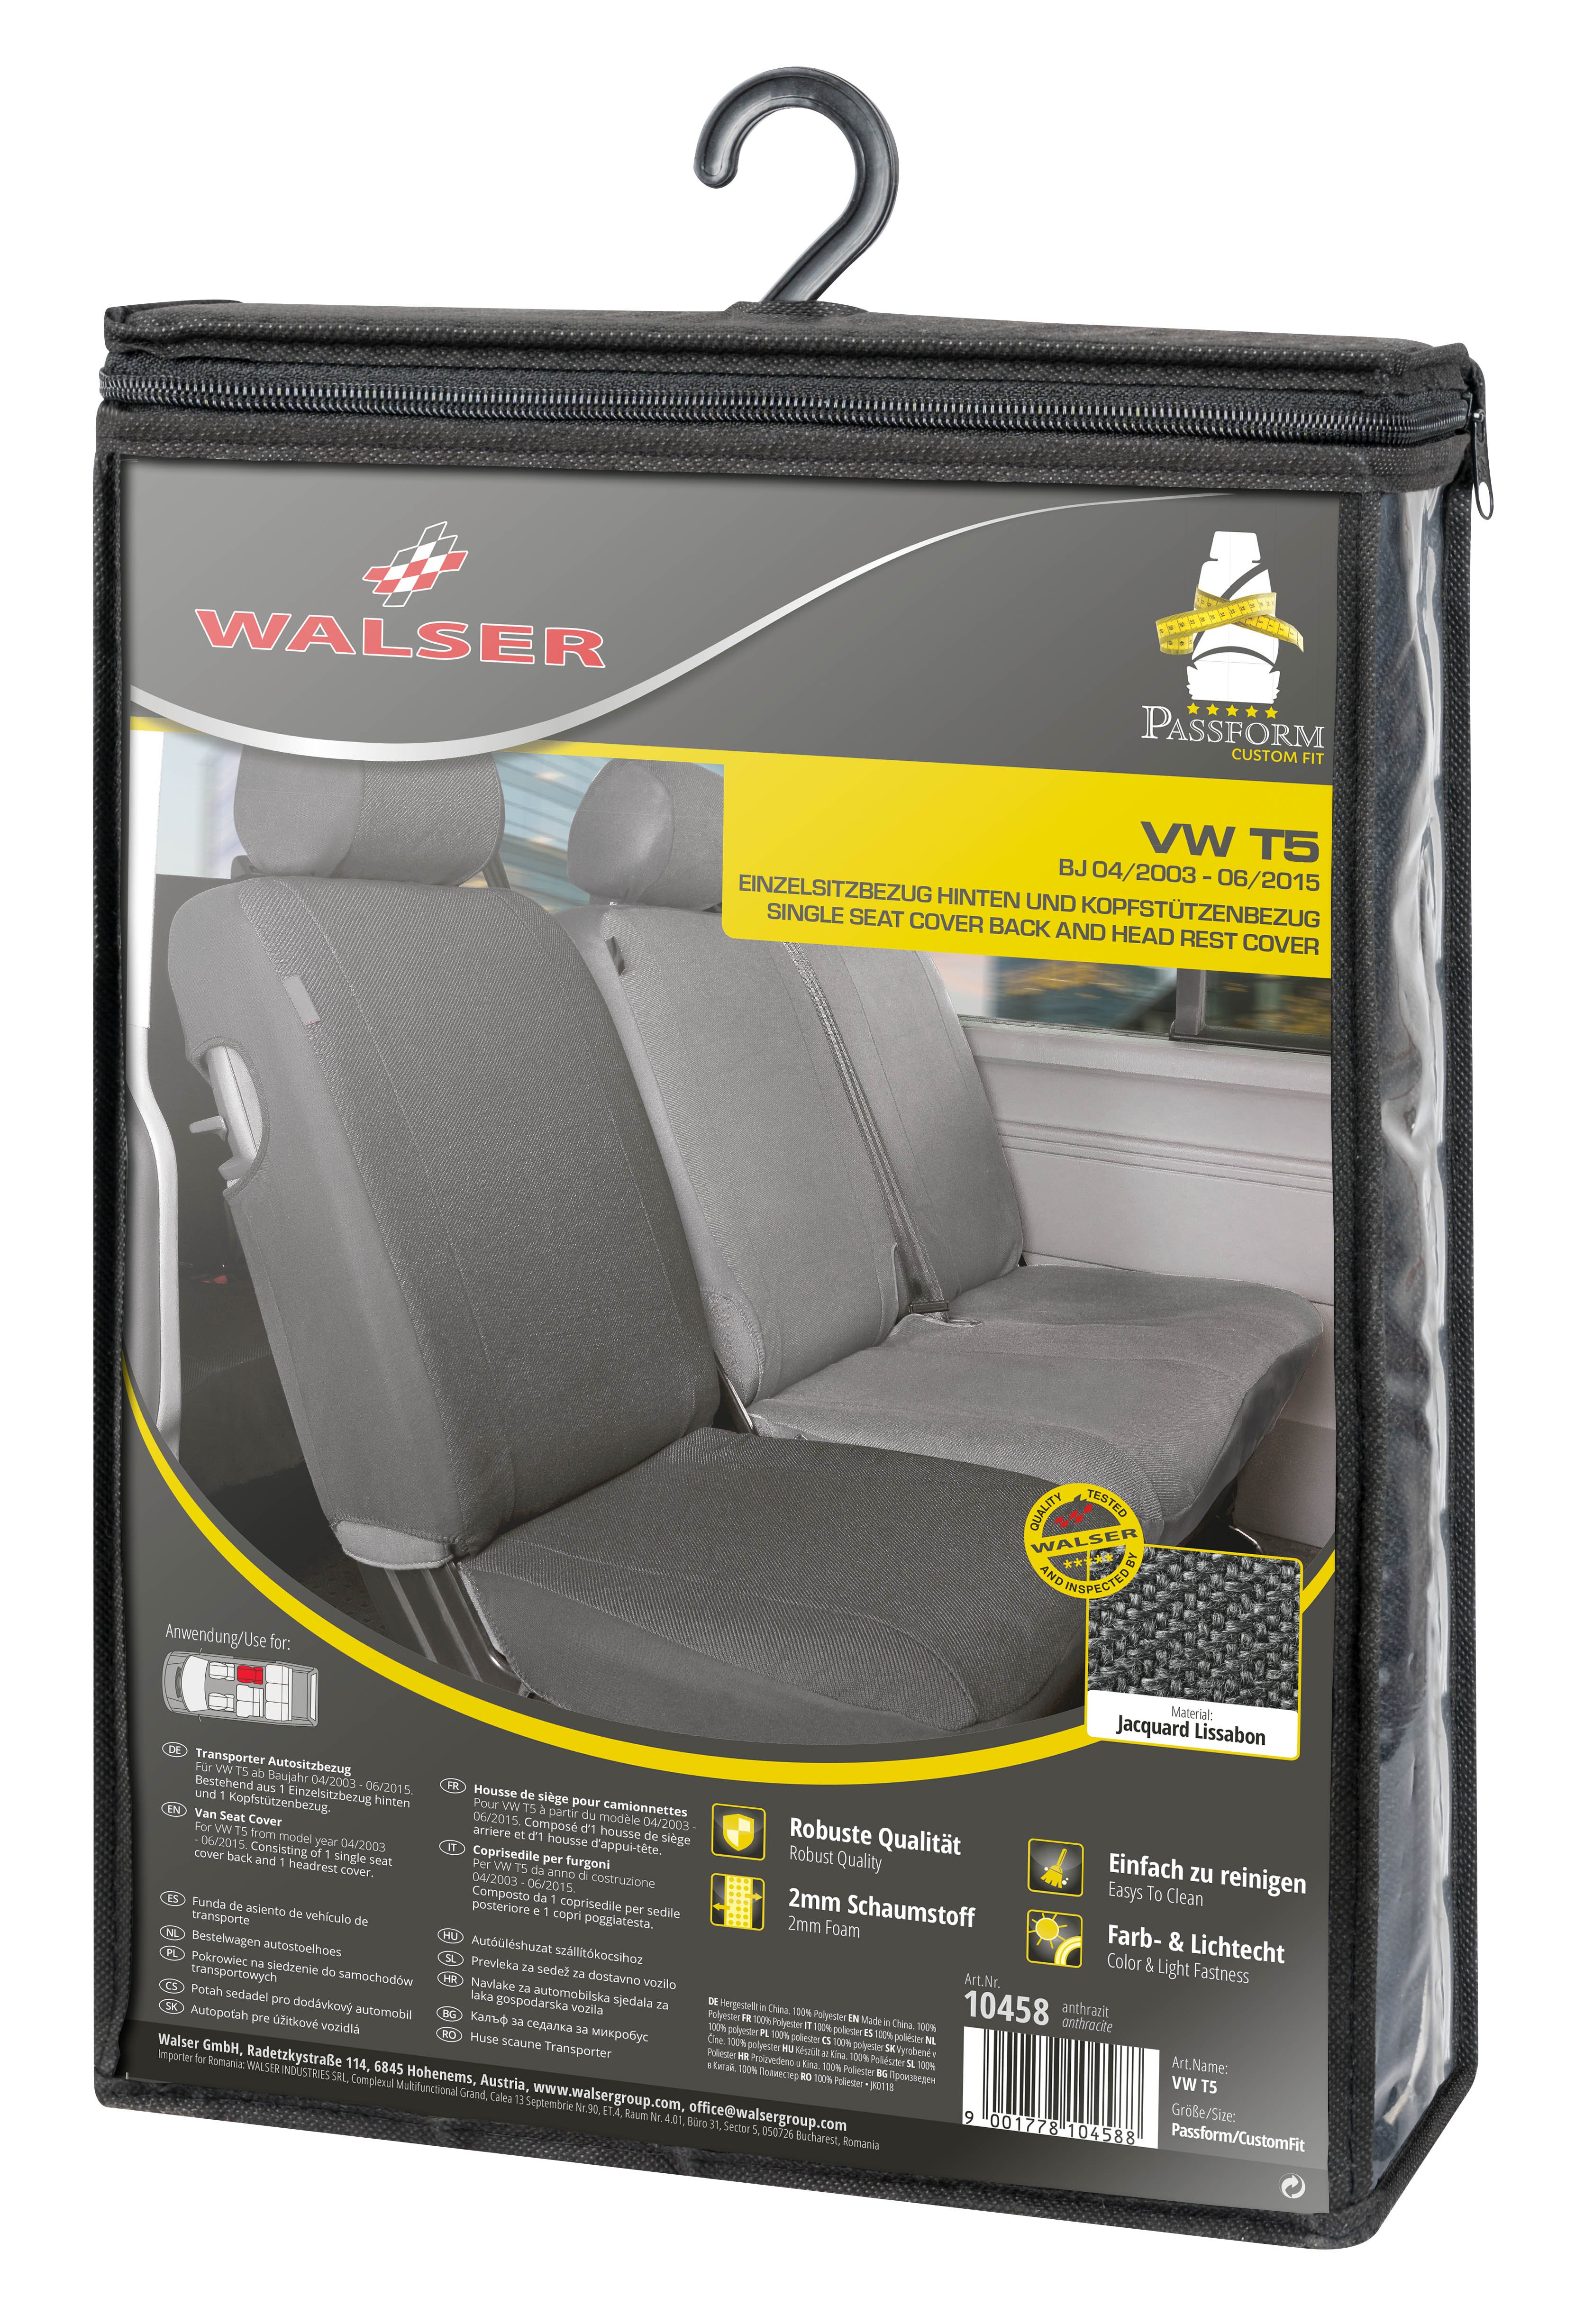 Seat cover made of fabric for VW T5, single seat cover rear